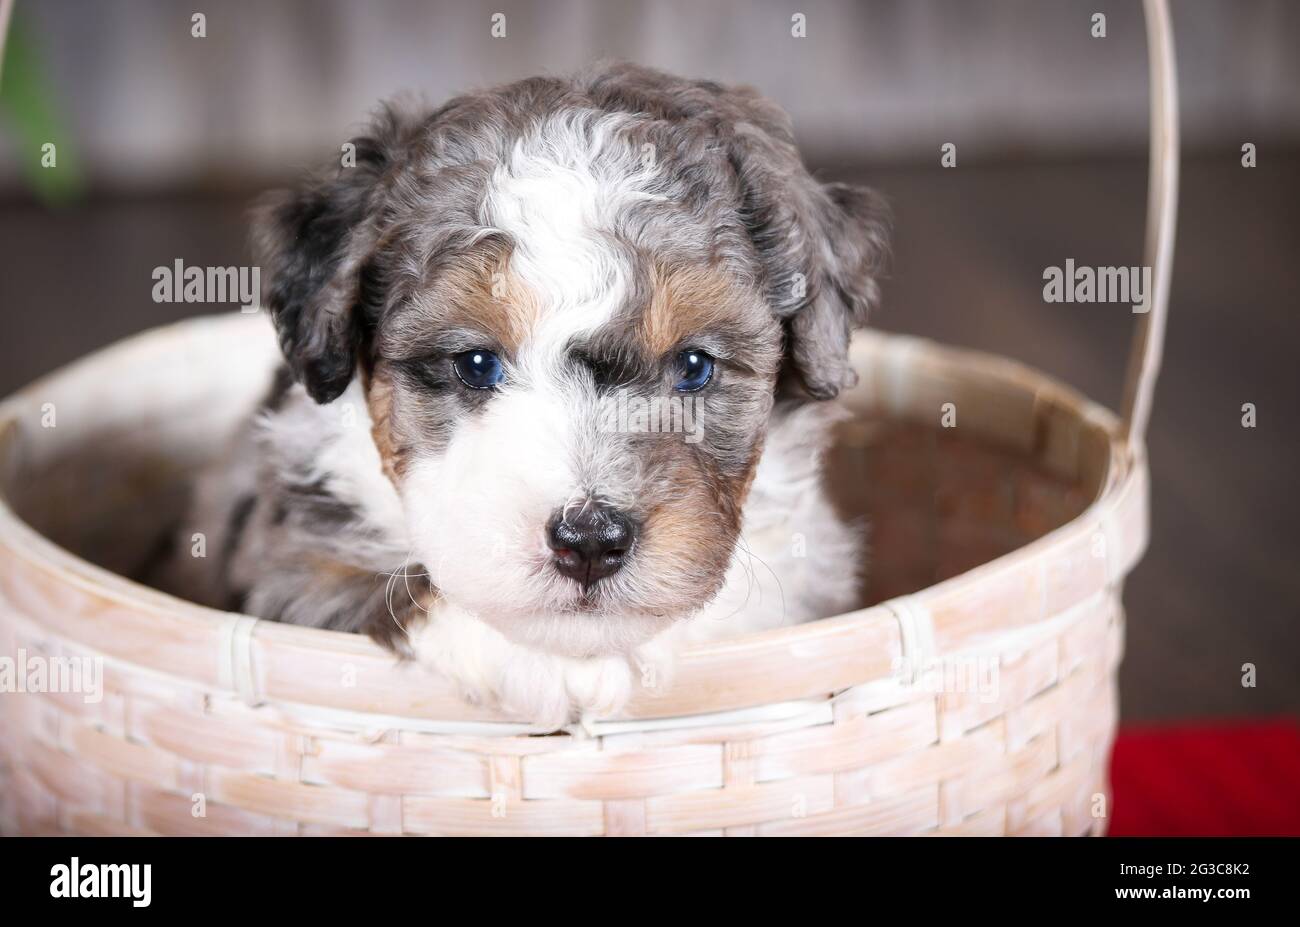 F2 Mini Bernedoodle puppy in white basket looking at camera at 5 weeks old. Basket sitting on red towel mat. Stock Photo